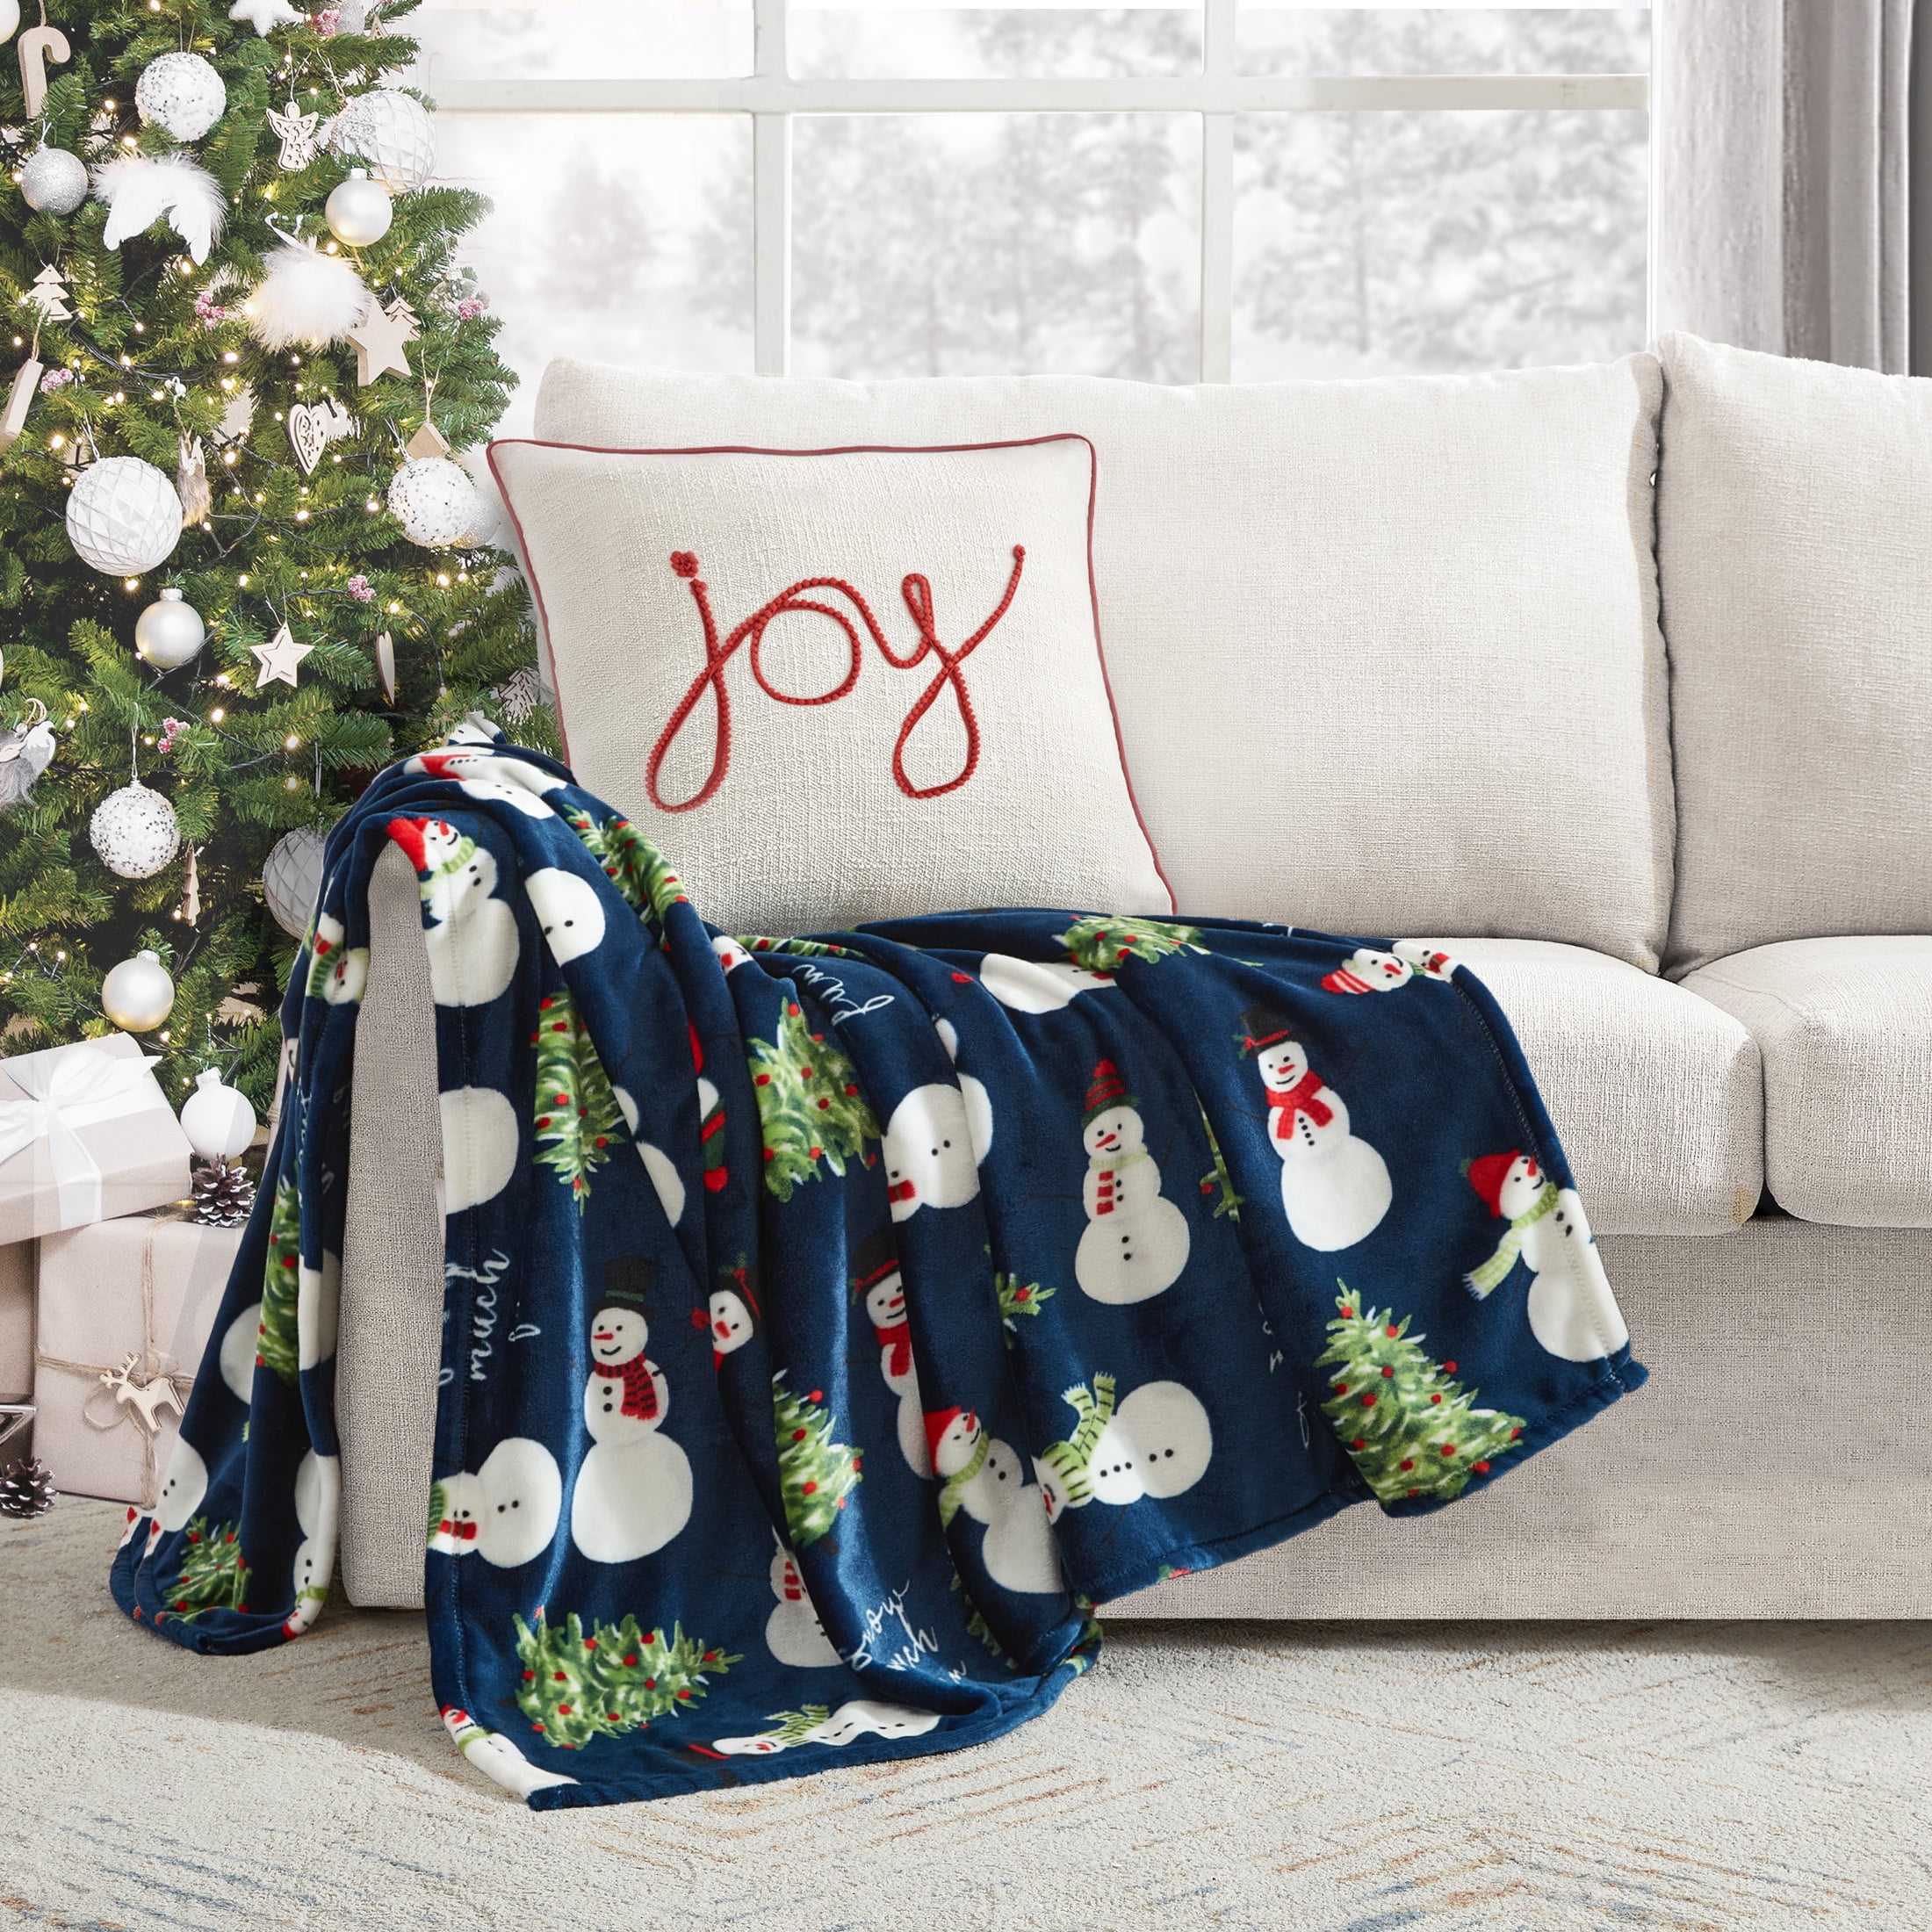 Holiday Time, Snowmen Holiday Throw Blanket, Navy, 50" x 60", 1 Pack